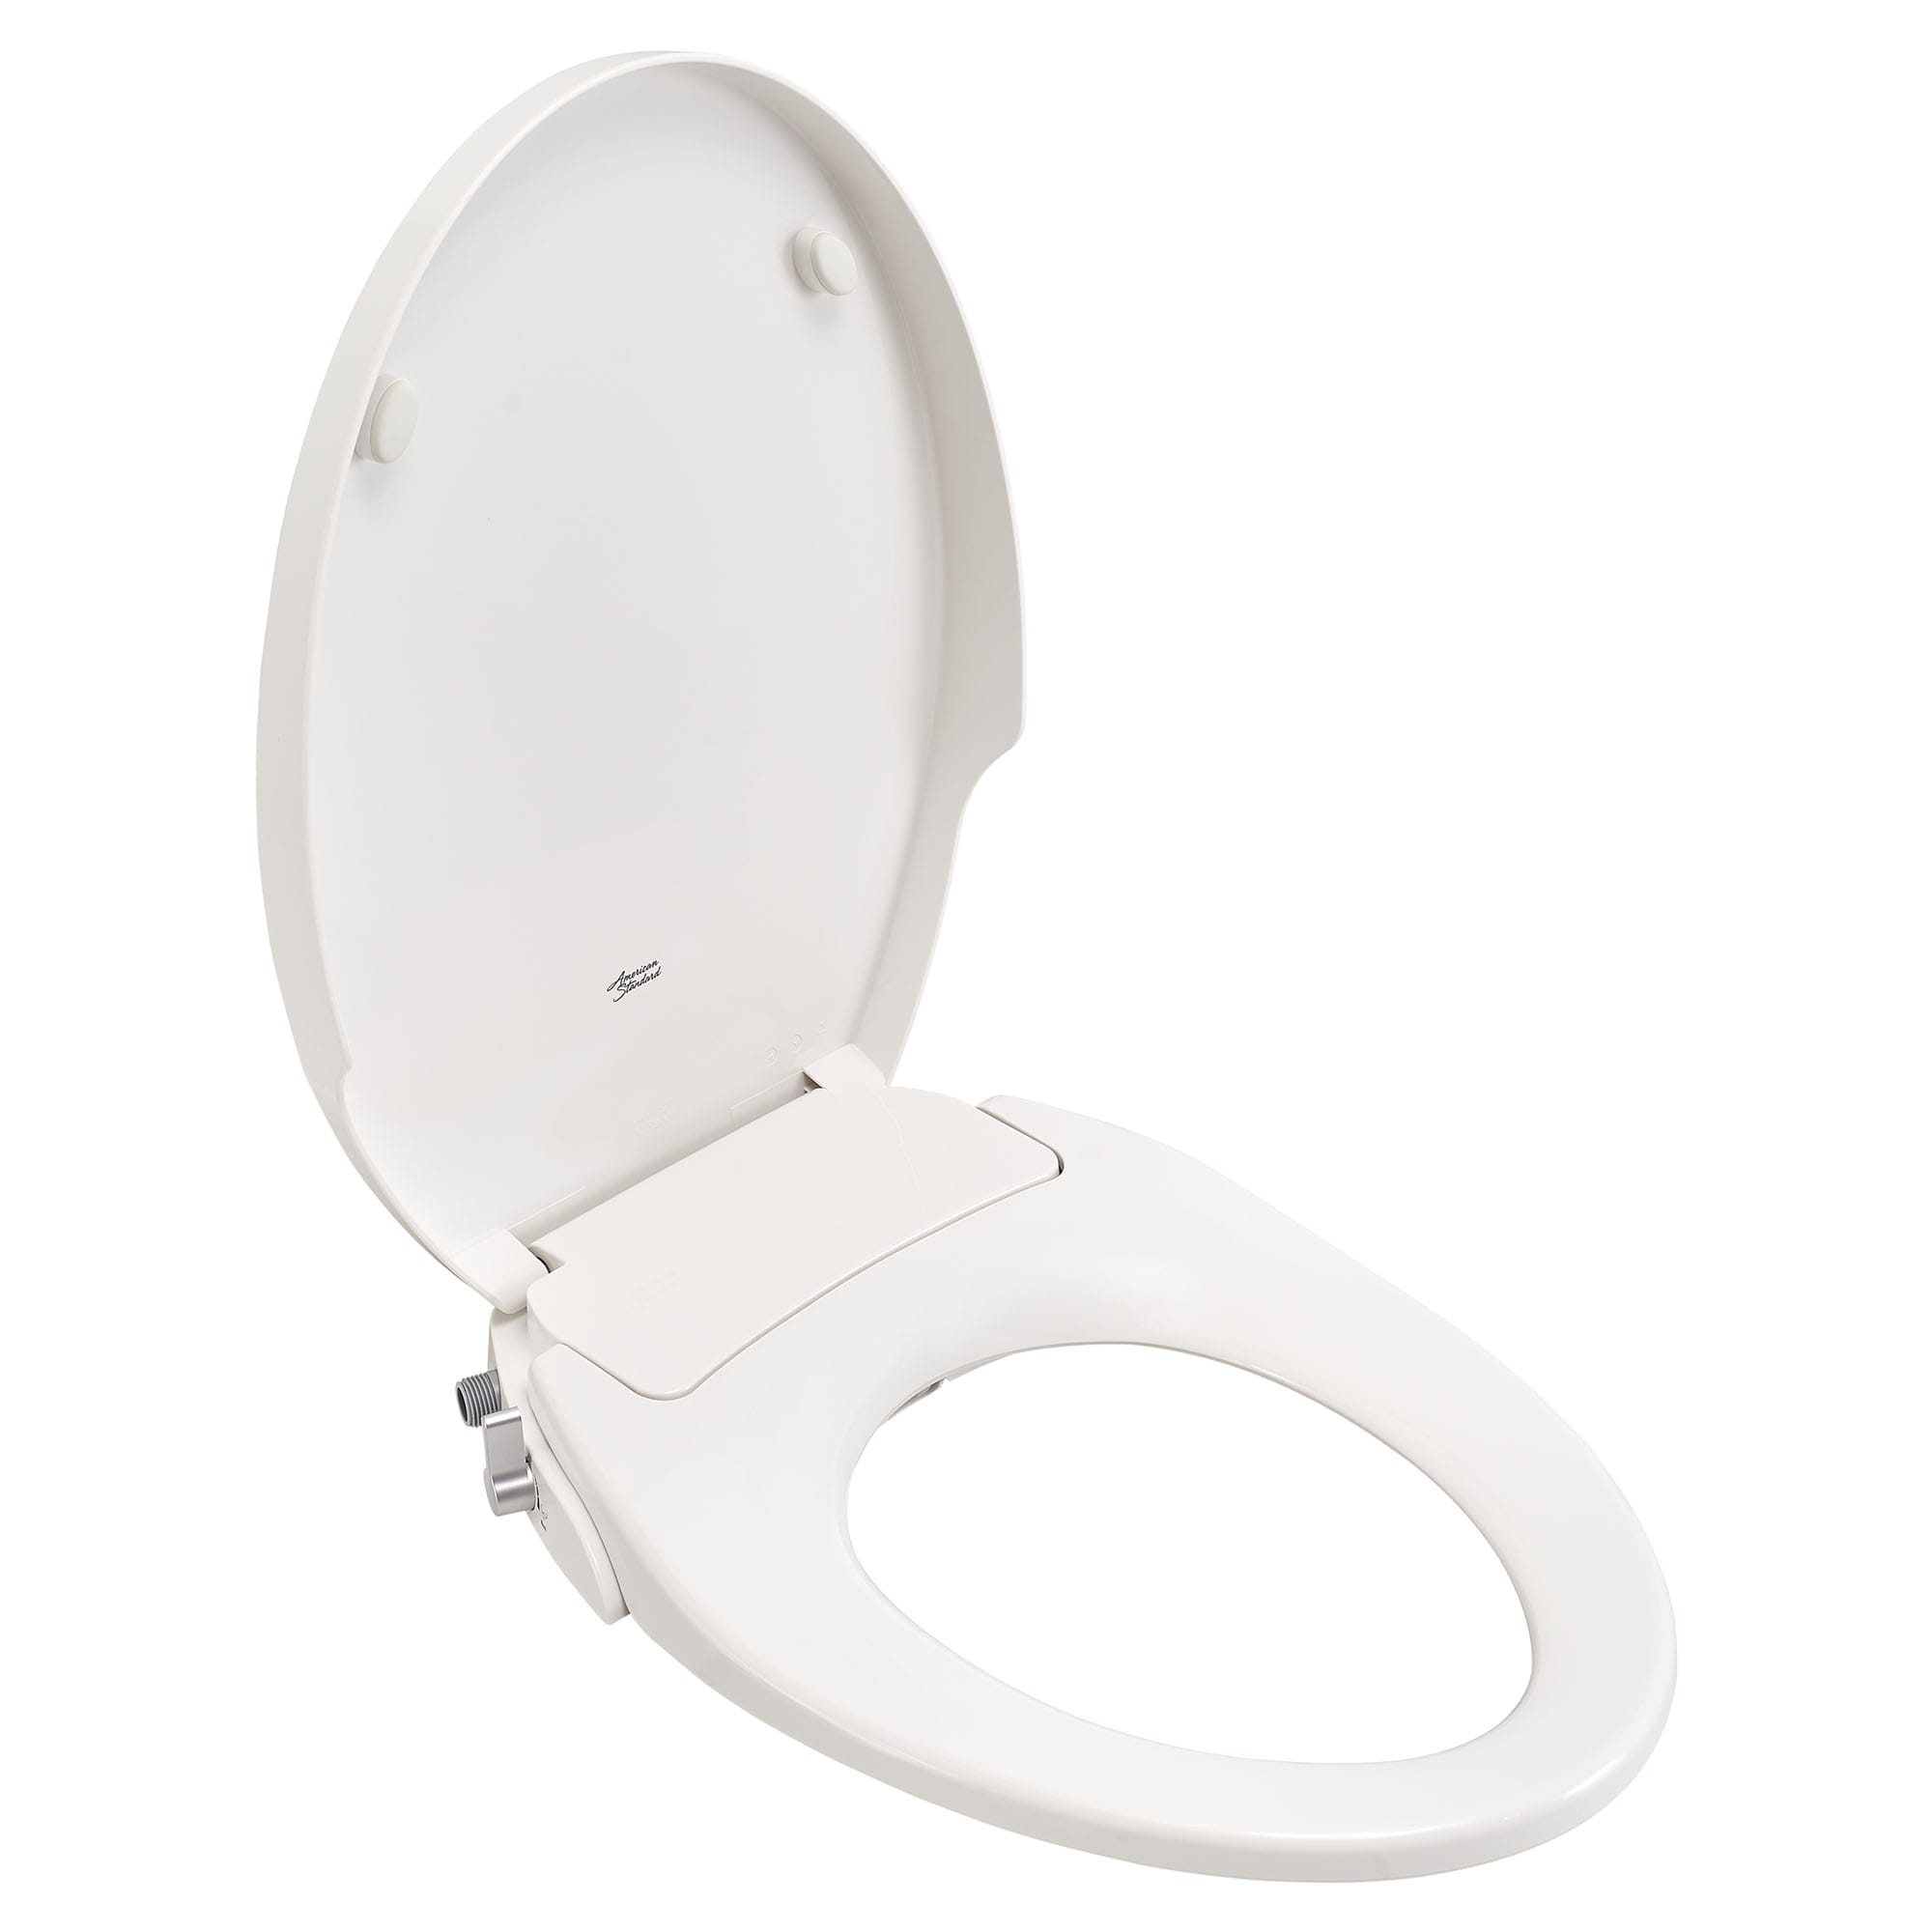 AquaWash® Non-Electric SpaLet® Bidet Seat With Manual Operation